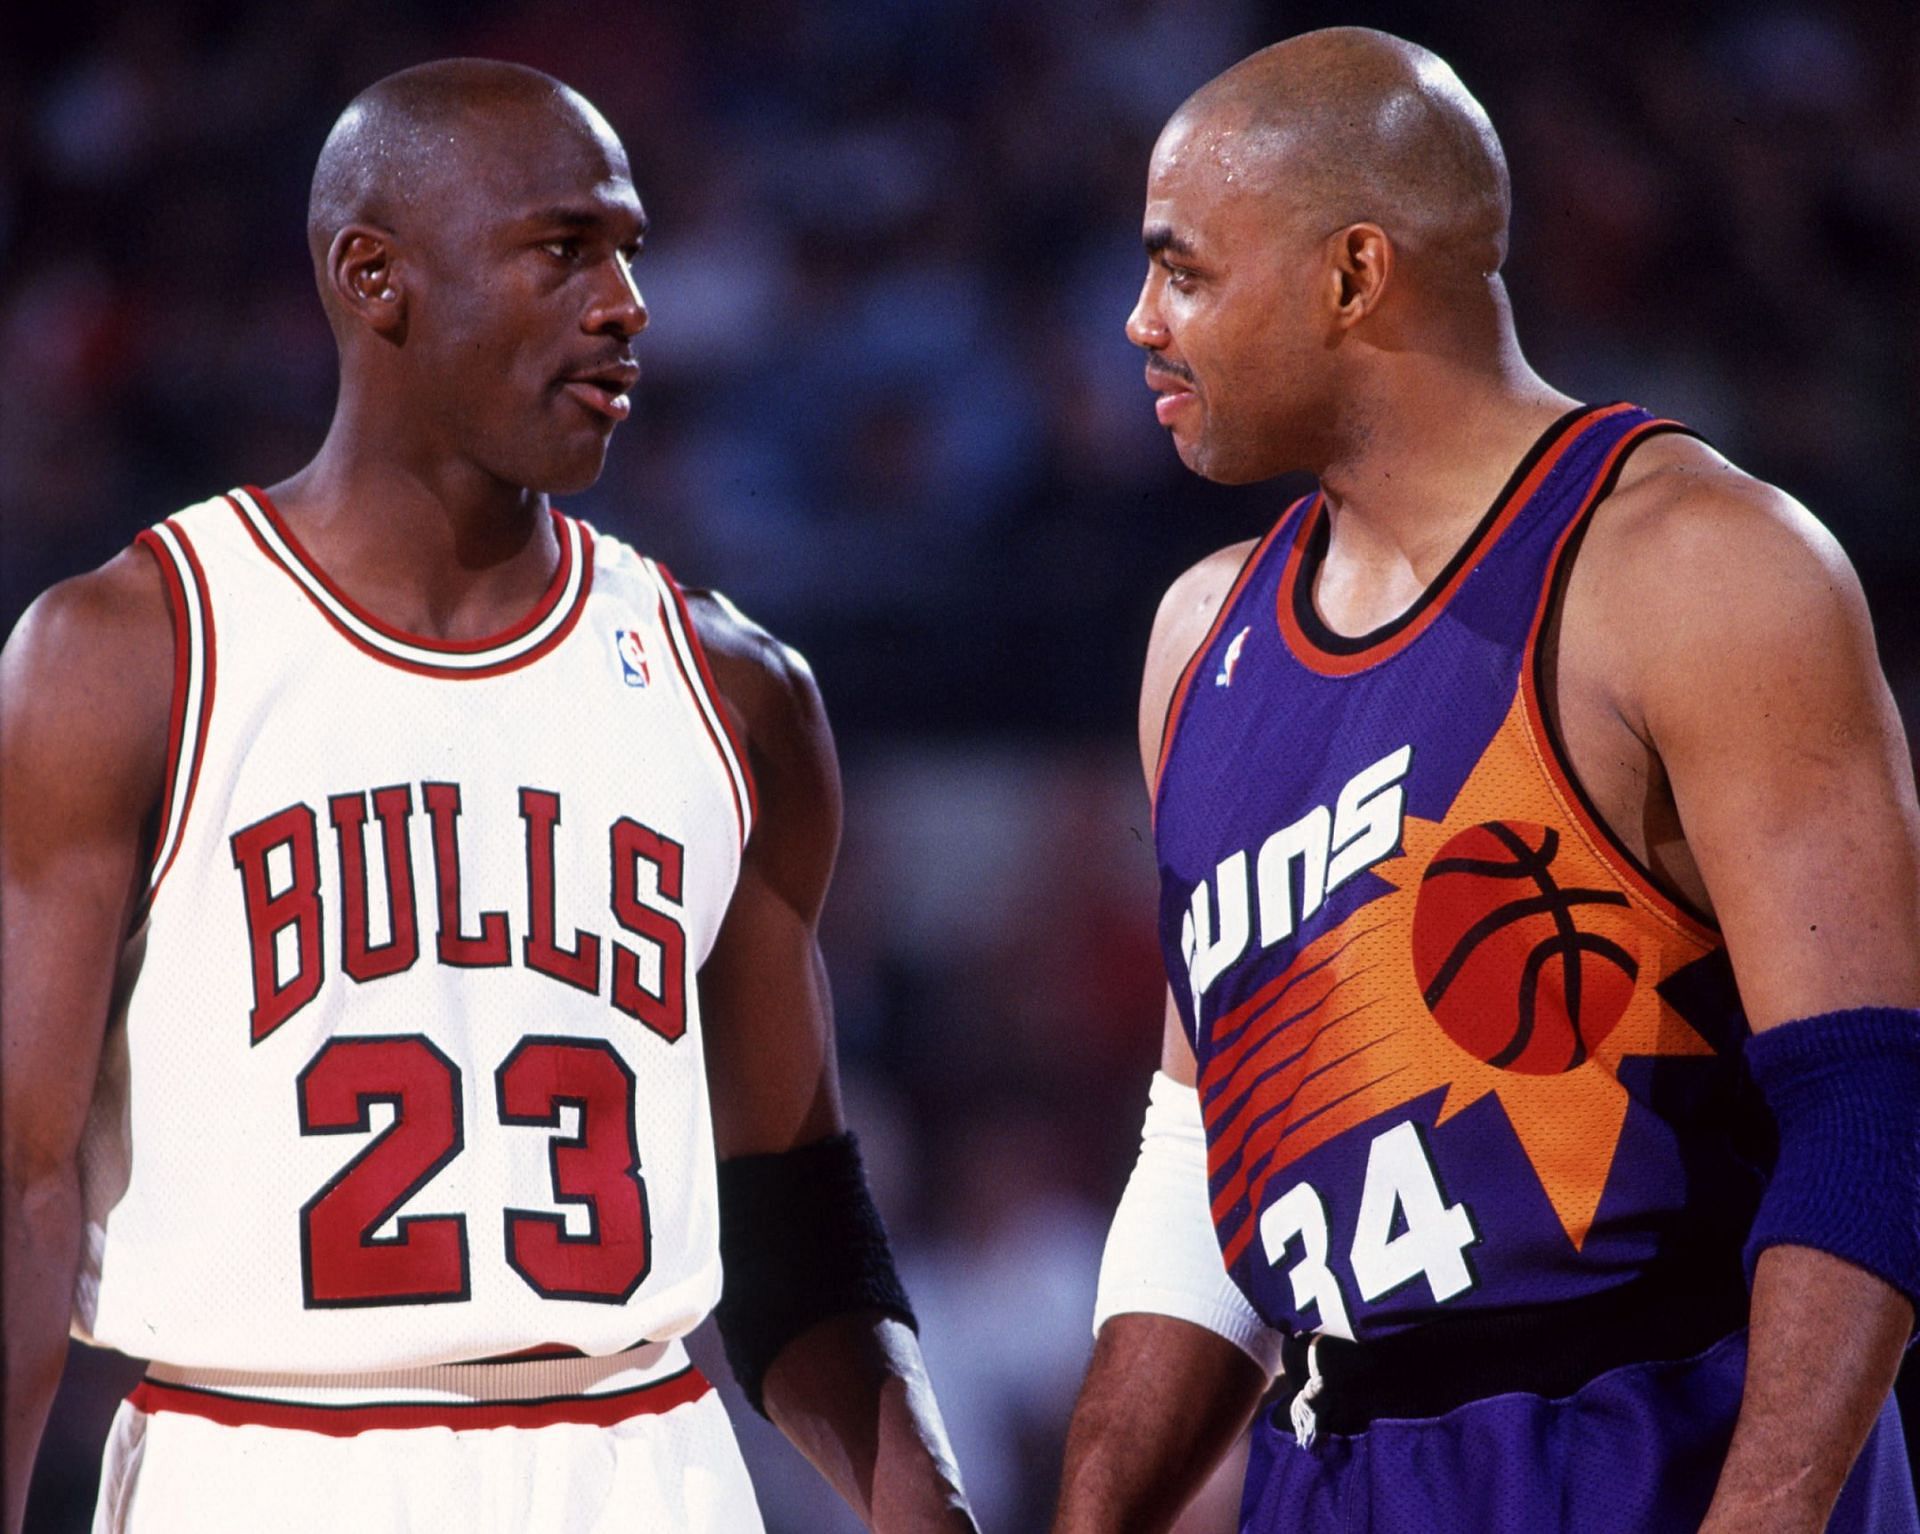 Charles Barkley doesn't think the Phoenix Suns are championship